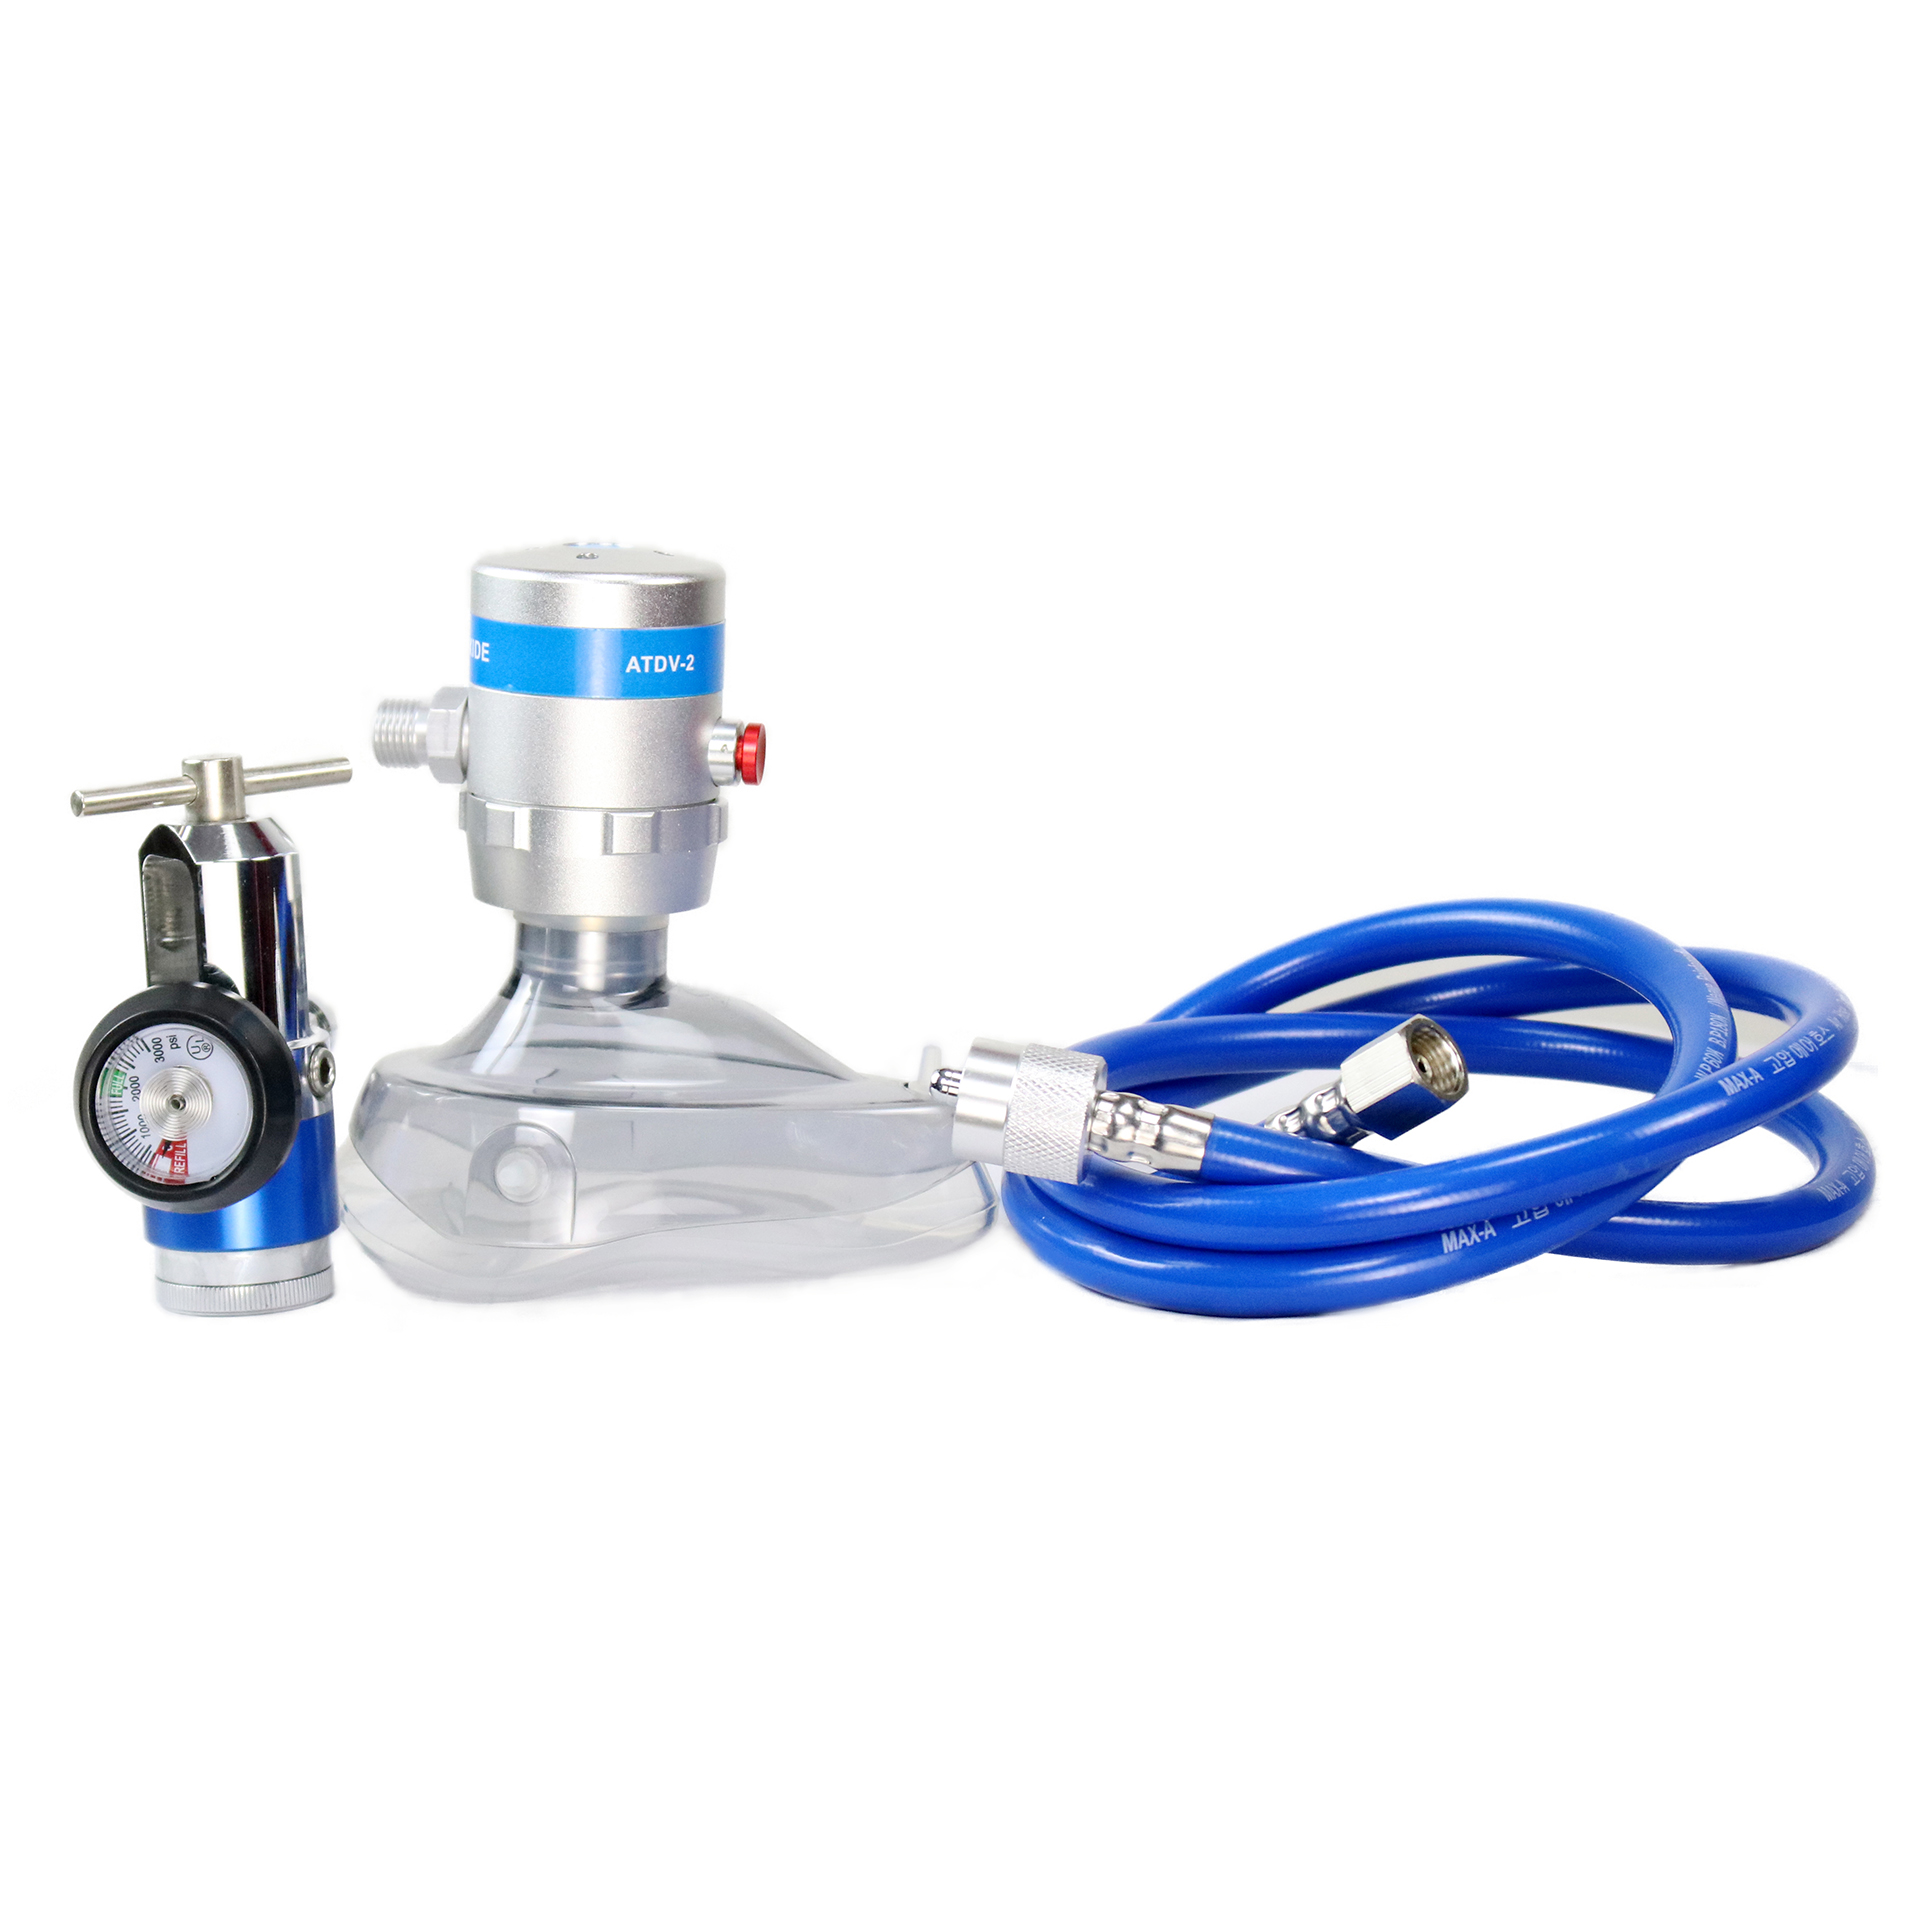 Laughing gas demand valve for N2O and O2 mixed gas